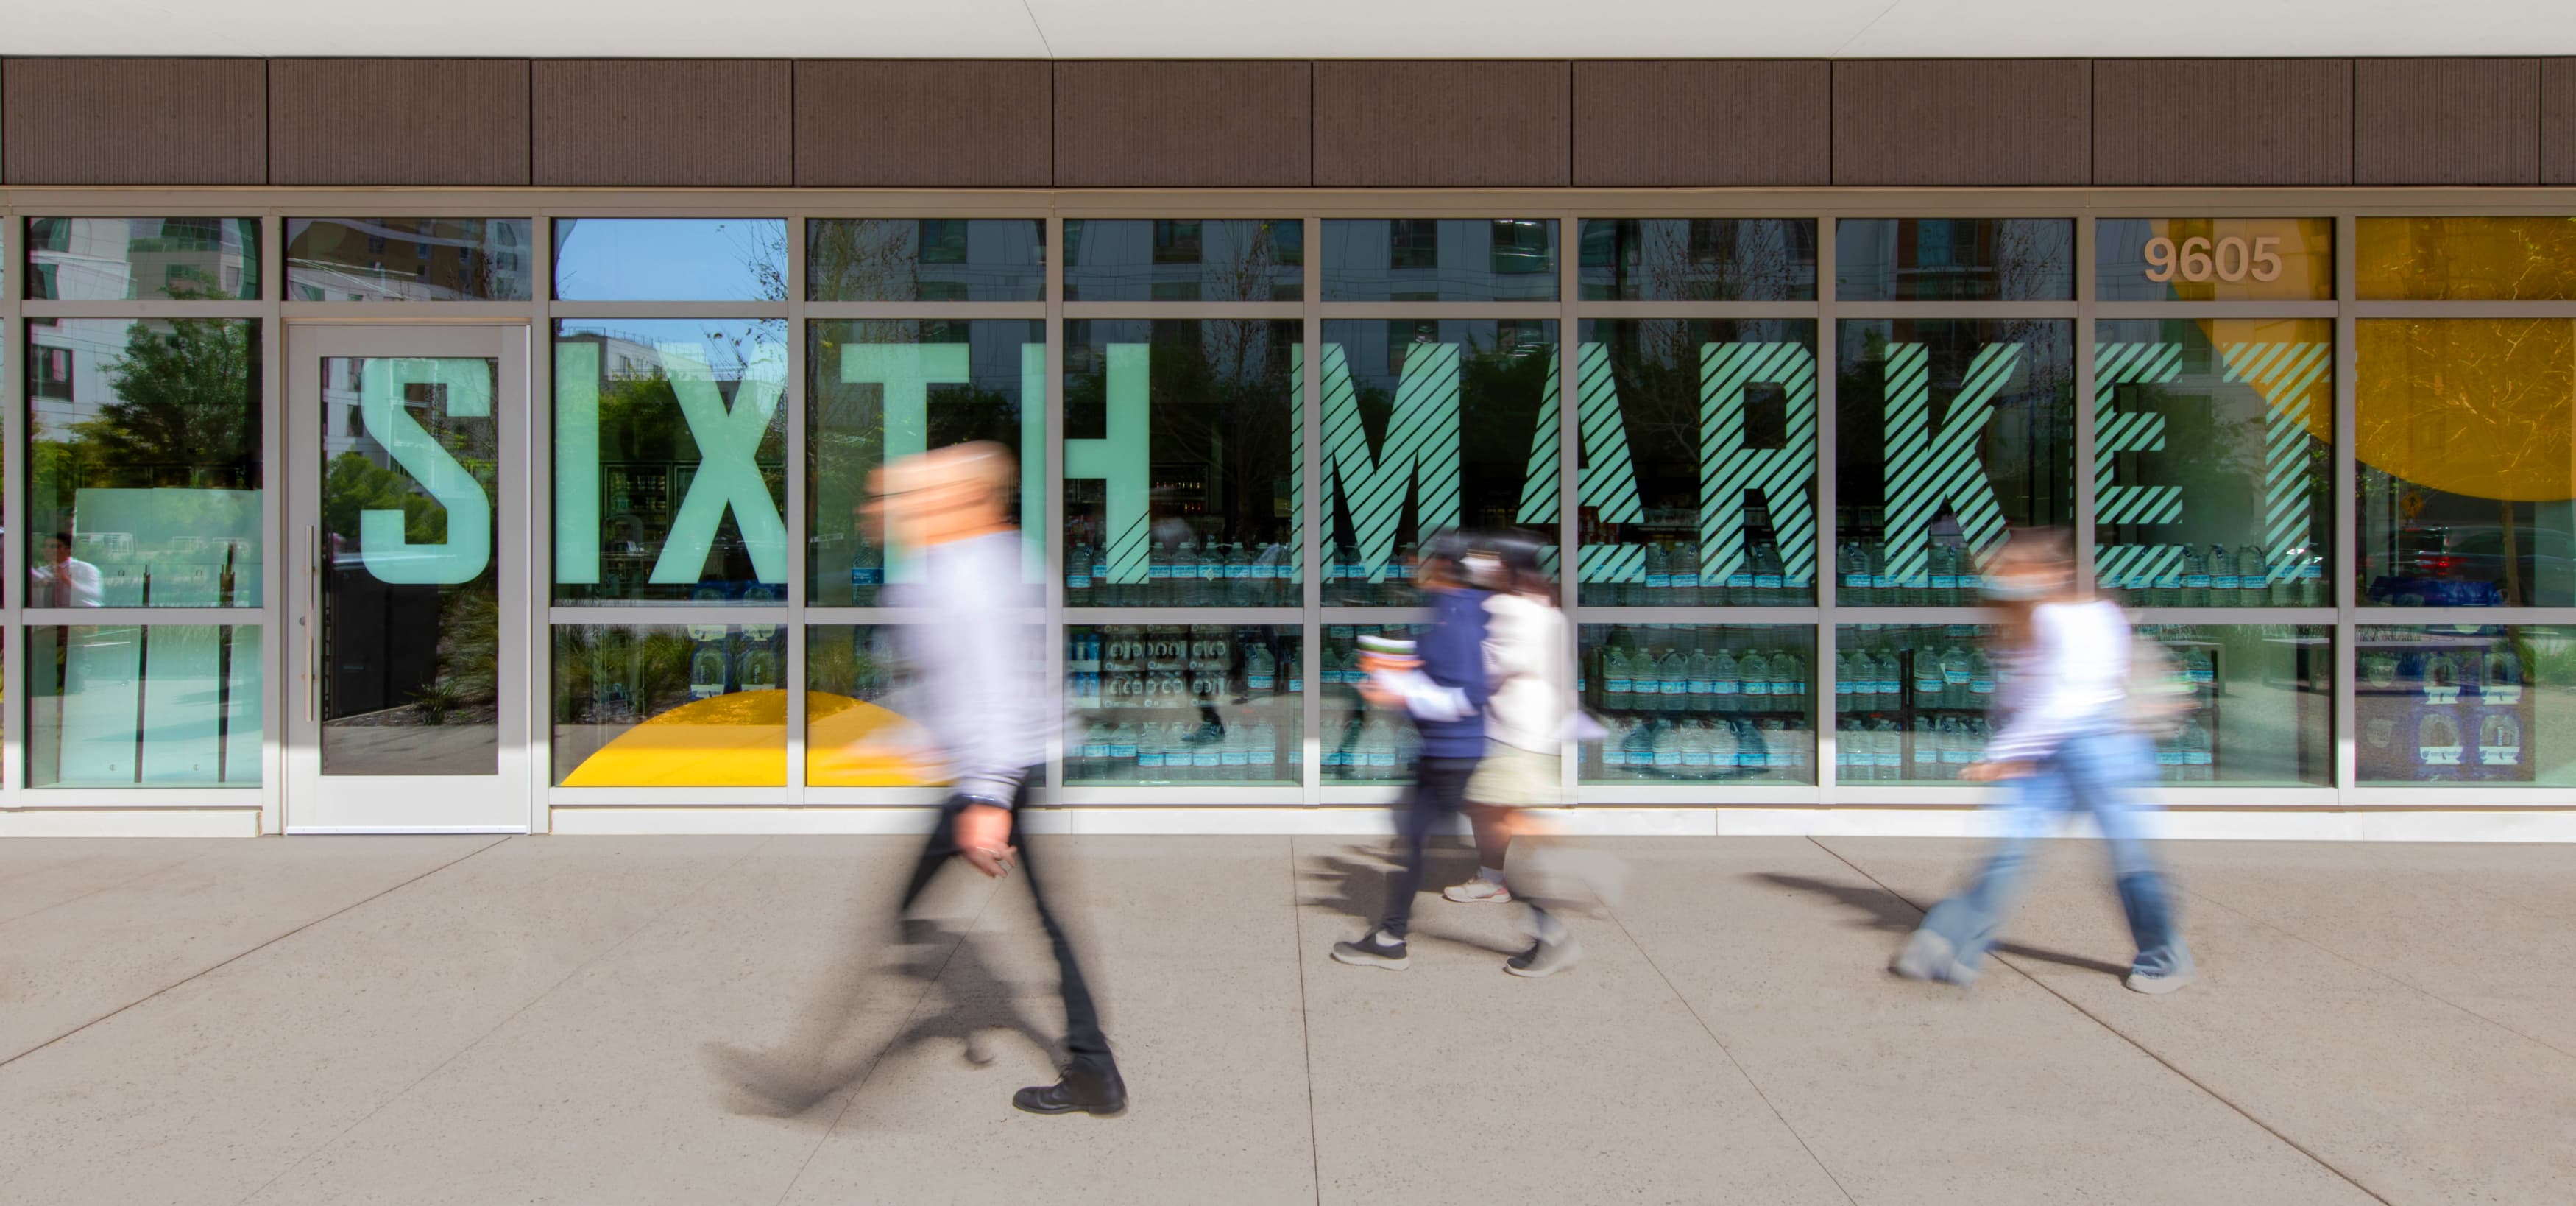 White "Sixth Market" vinyl identity graphic on window for UC San Diego Sixth Market dining hall by RSM Design in San Diego, California.